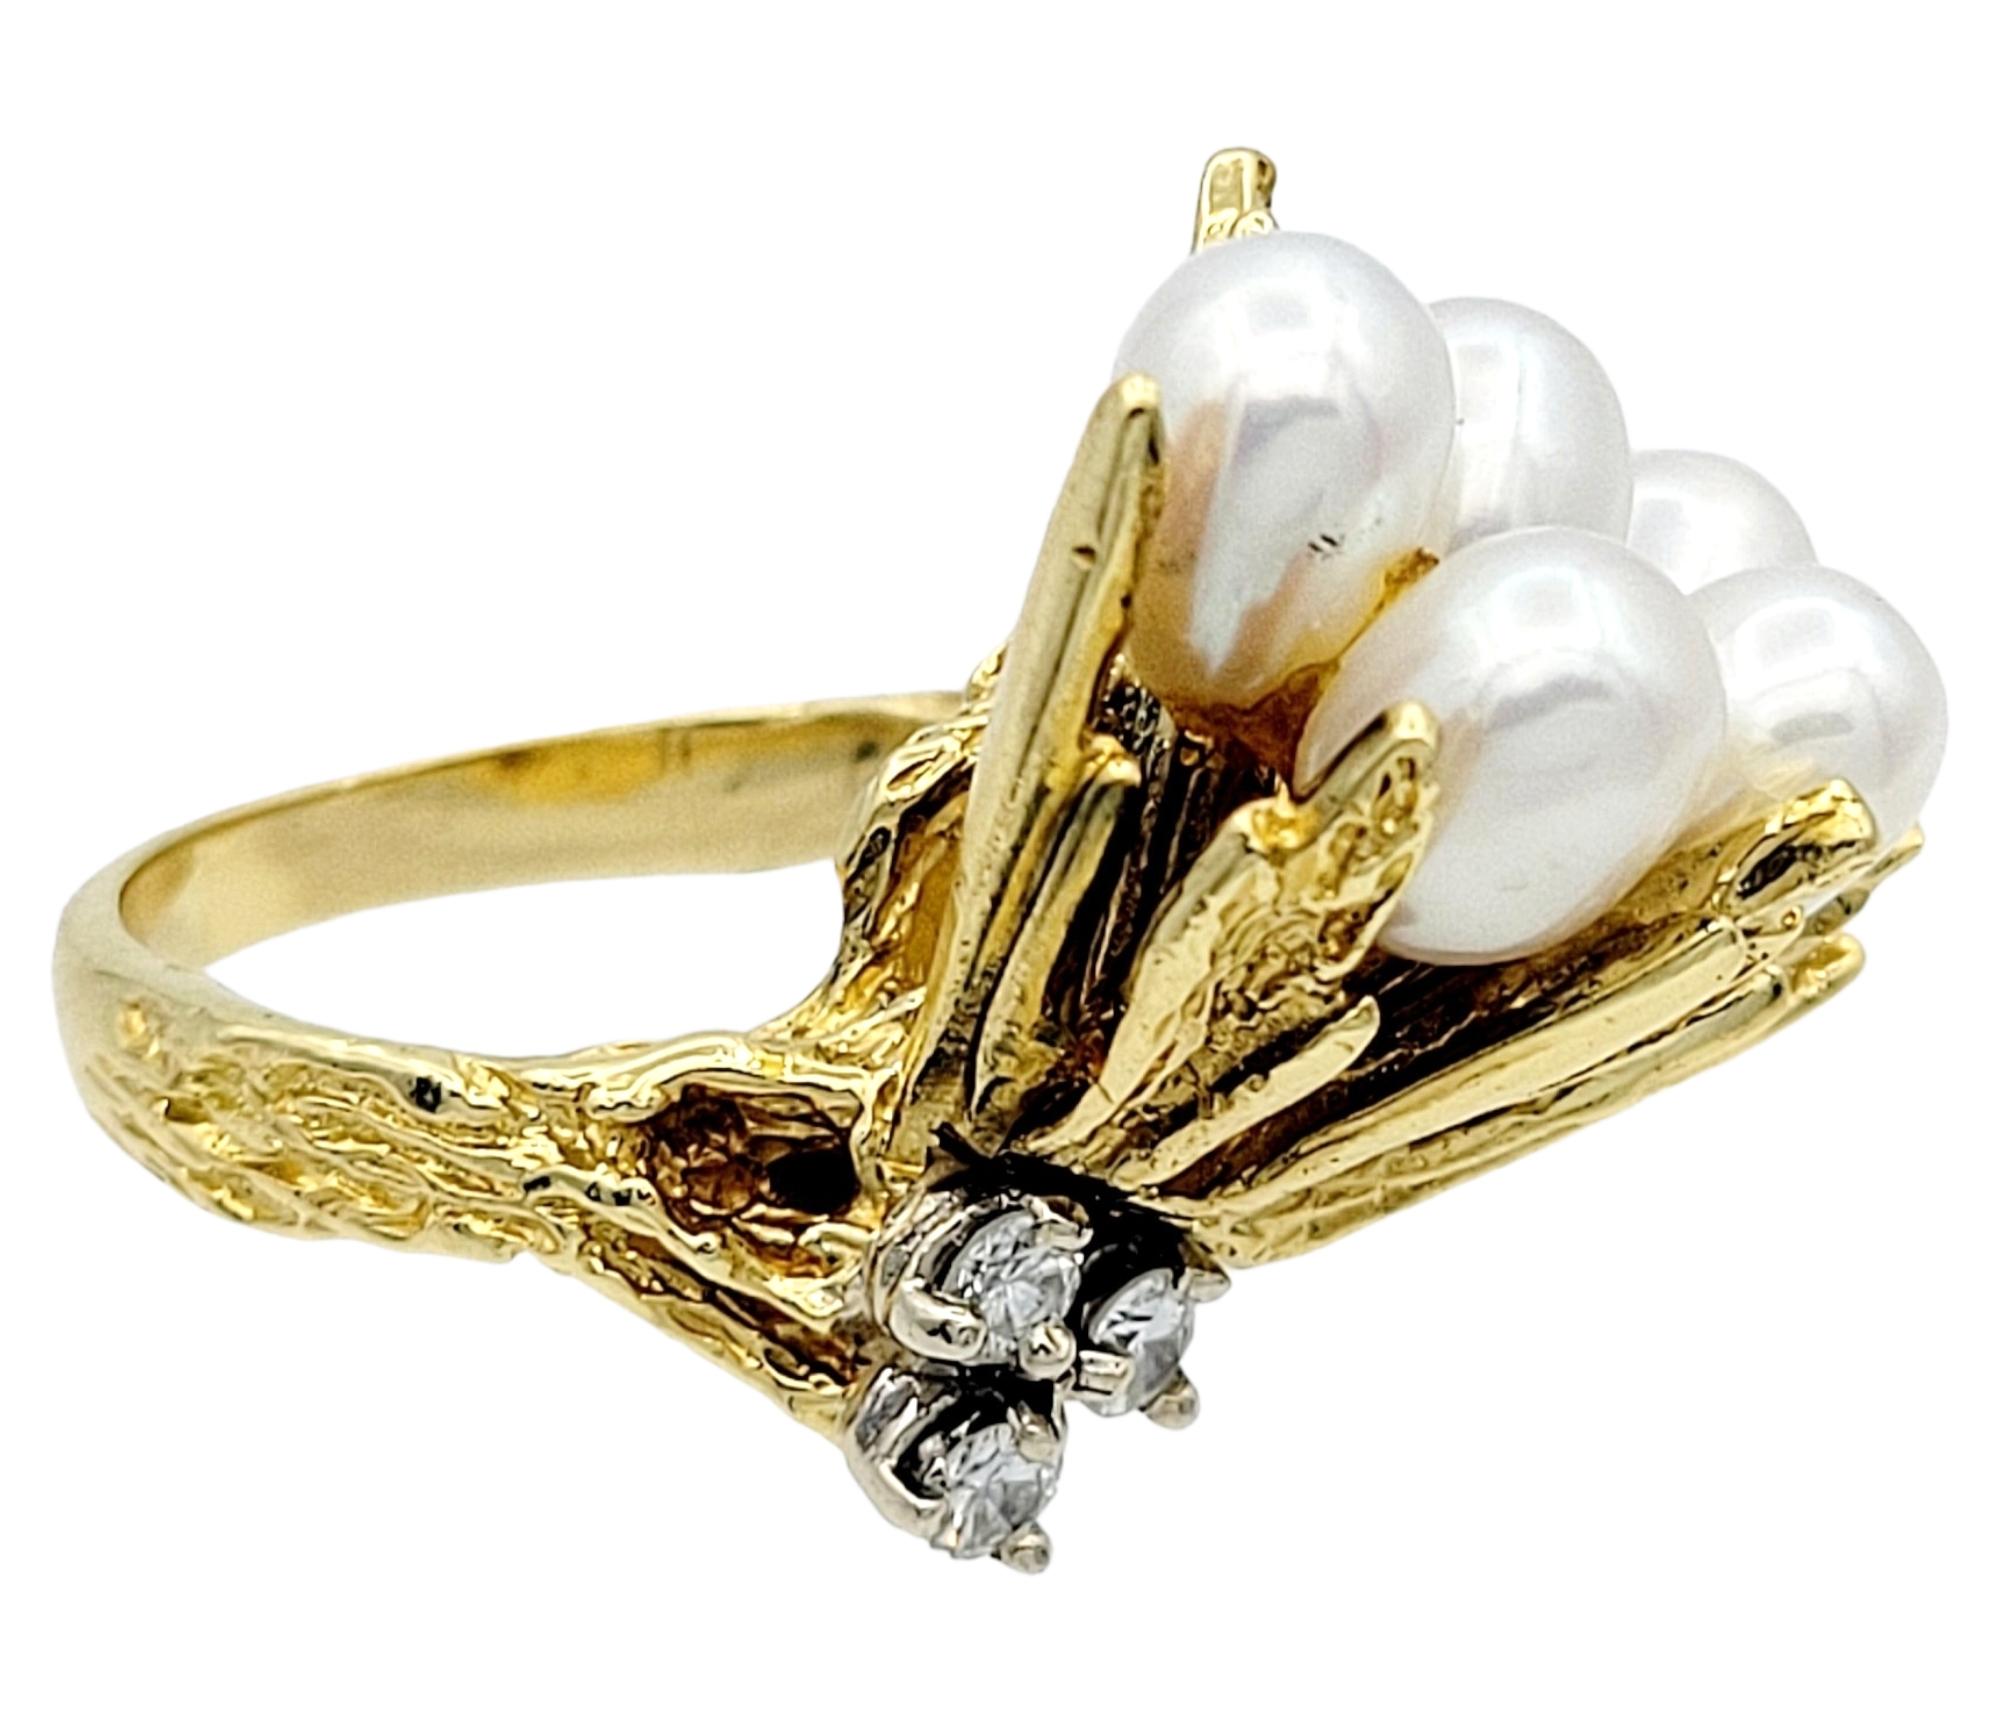 Ring Size: 6

This dazzling diamond and white cultured pearl cluster cocktail ring in 18-karat yellow gold is an exquisite statement piece to add to your fine jewelry collection. The ring boasts a bouquet of lustrous white cultured drop-shaped